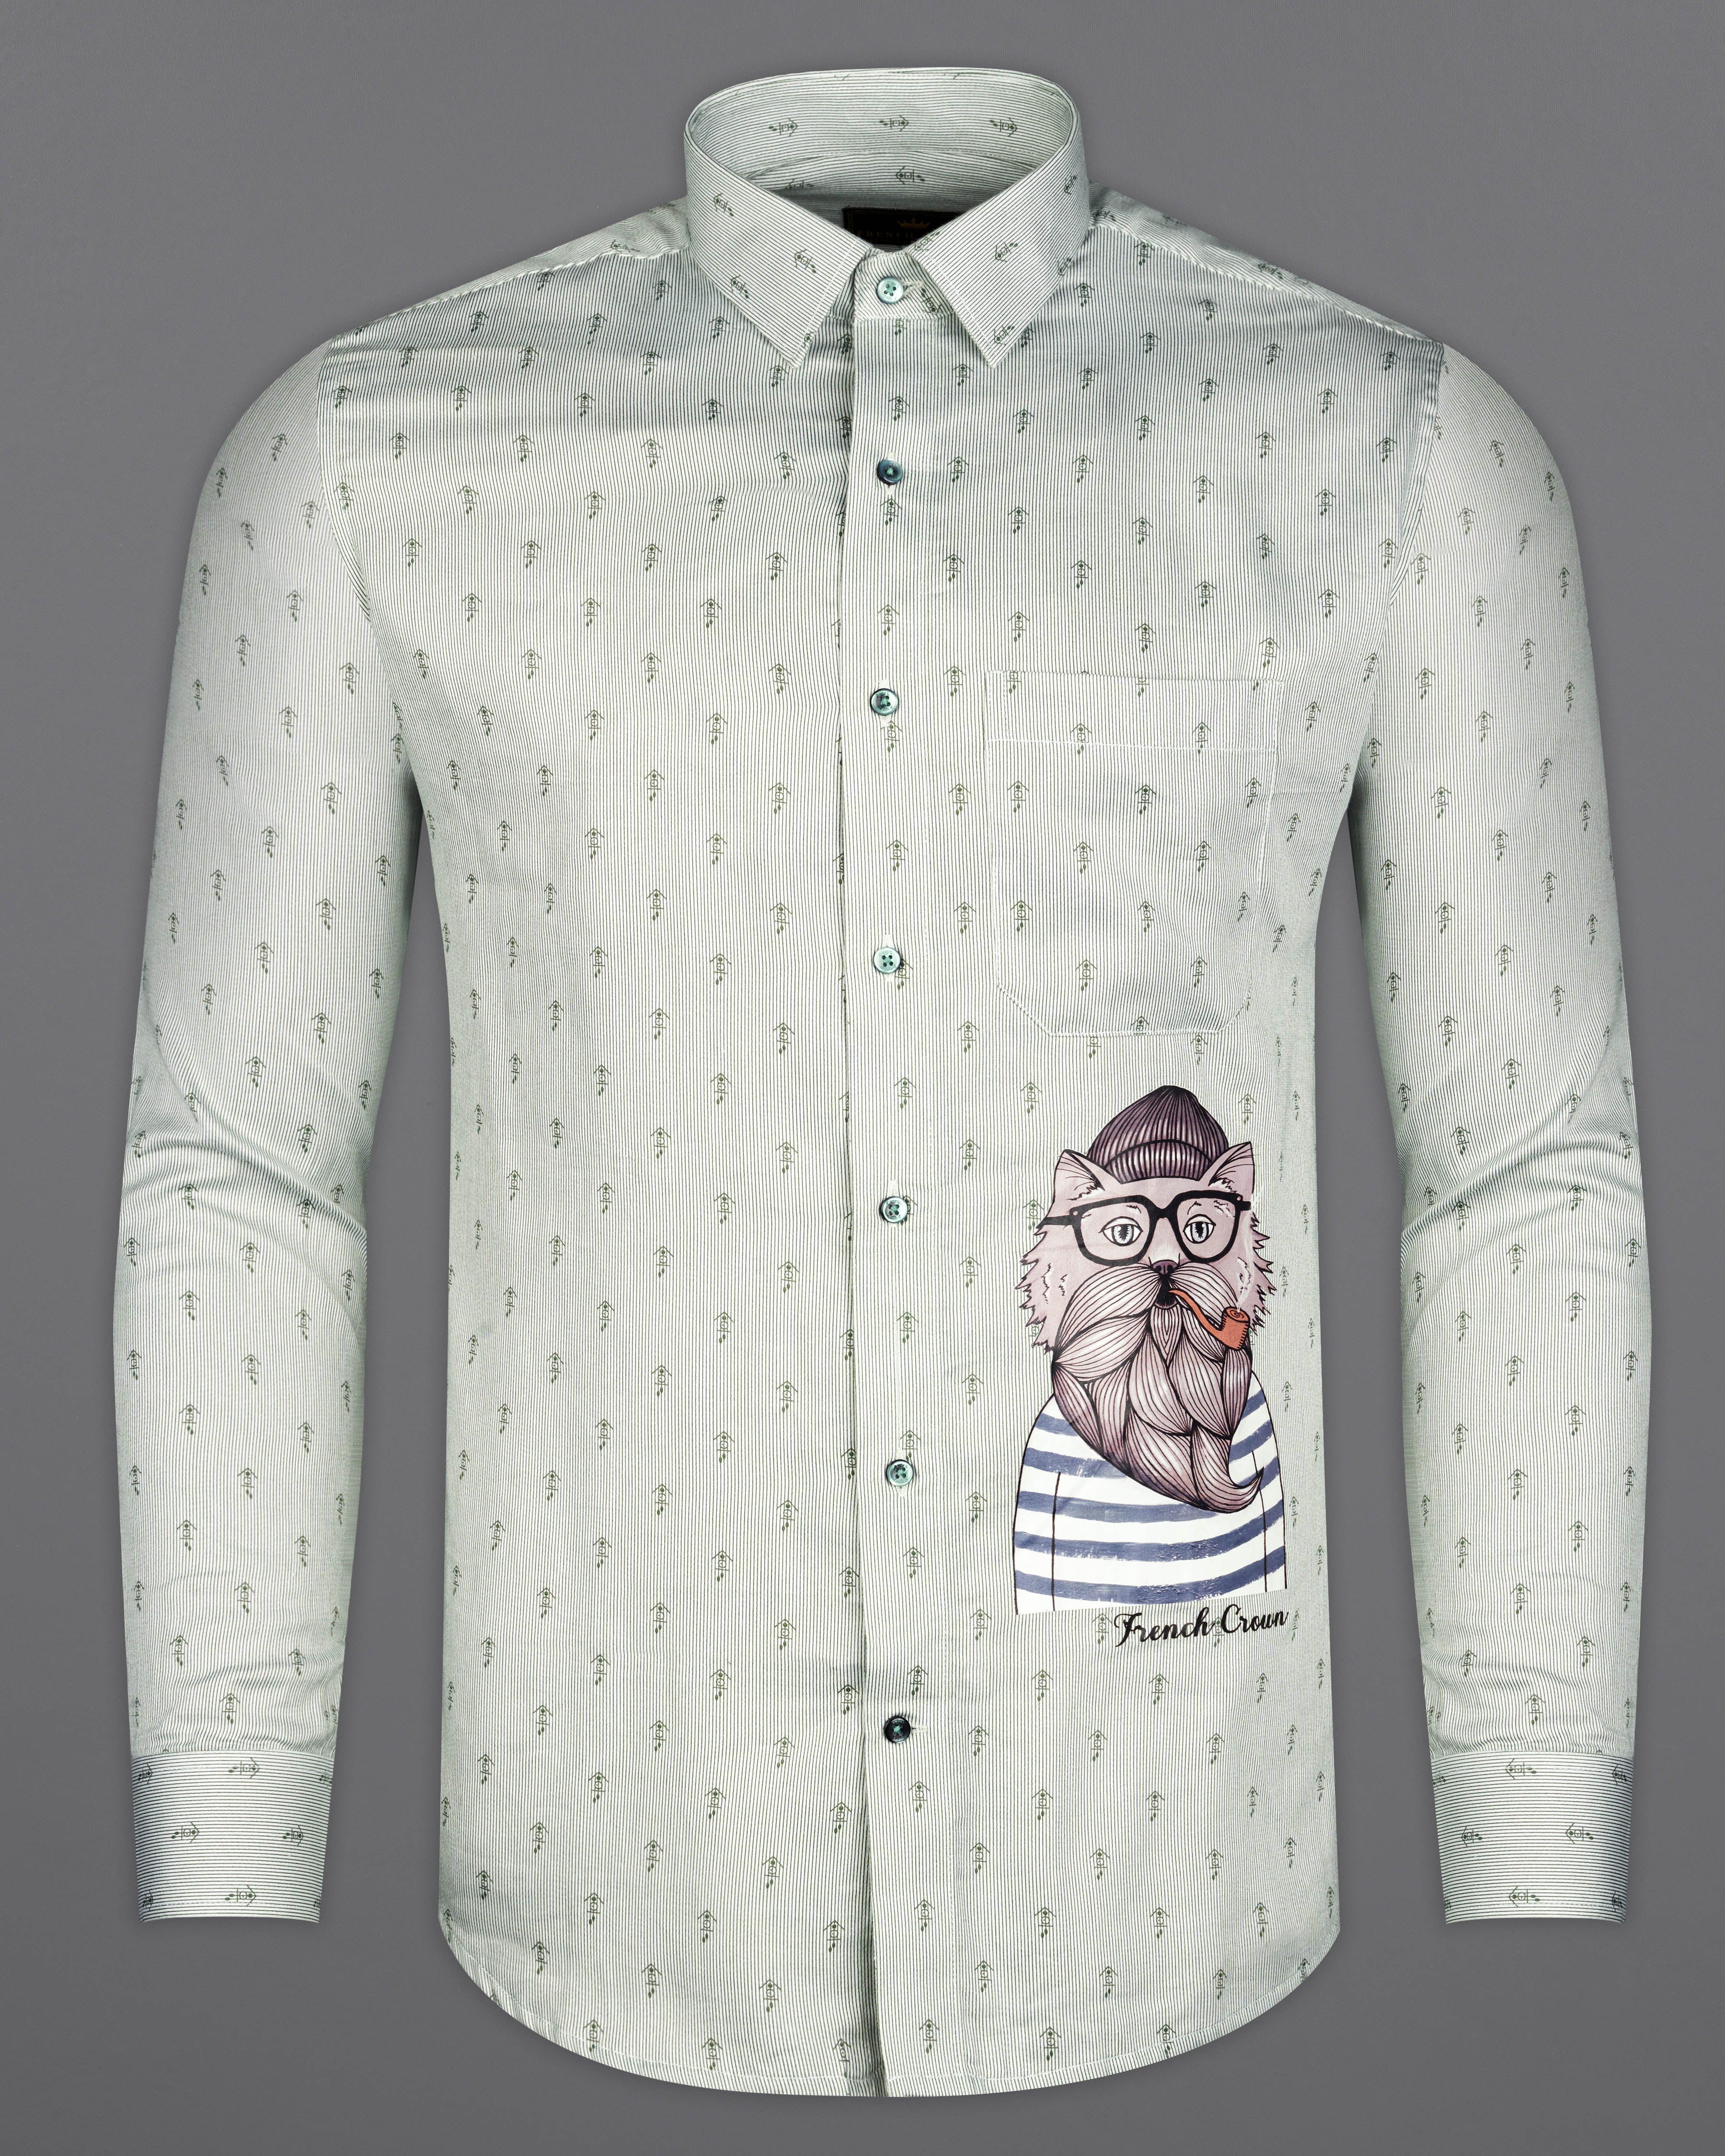 Catskill White with Hemlock Green Pinstriped with Animated Printed Premium Cotton Designer Shirt 7672-GR-RPRT-002-38, 7672-GR-RPRT-002-H-38, 7672-GR-RPRT-002-39, 7672-GR-RPRT-002-H-39, 7672-GR-RPRT-002-40, 7672-GR-RPRT-002-H-40, 7672-GR-RPRT-002-42, 7672-GR-RPRT-002-H-42, 7672-GR-RPRT-002-44, 7672-GR-RPRT-002-H-44, 7672-GR-RPRT-002-46, 7672-GR-RPRT-002-H-46, 7672-GR-RPRT-002-48, 7672-GR-RPRT-002-H-48, 7672-GR-RPRT-002-50, 7672-GR-RPRT-002-H-50, 7672-GR-RPRT-002-52, 7672-GR-RPRT-002-H-52